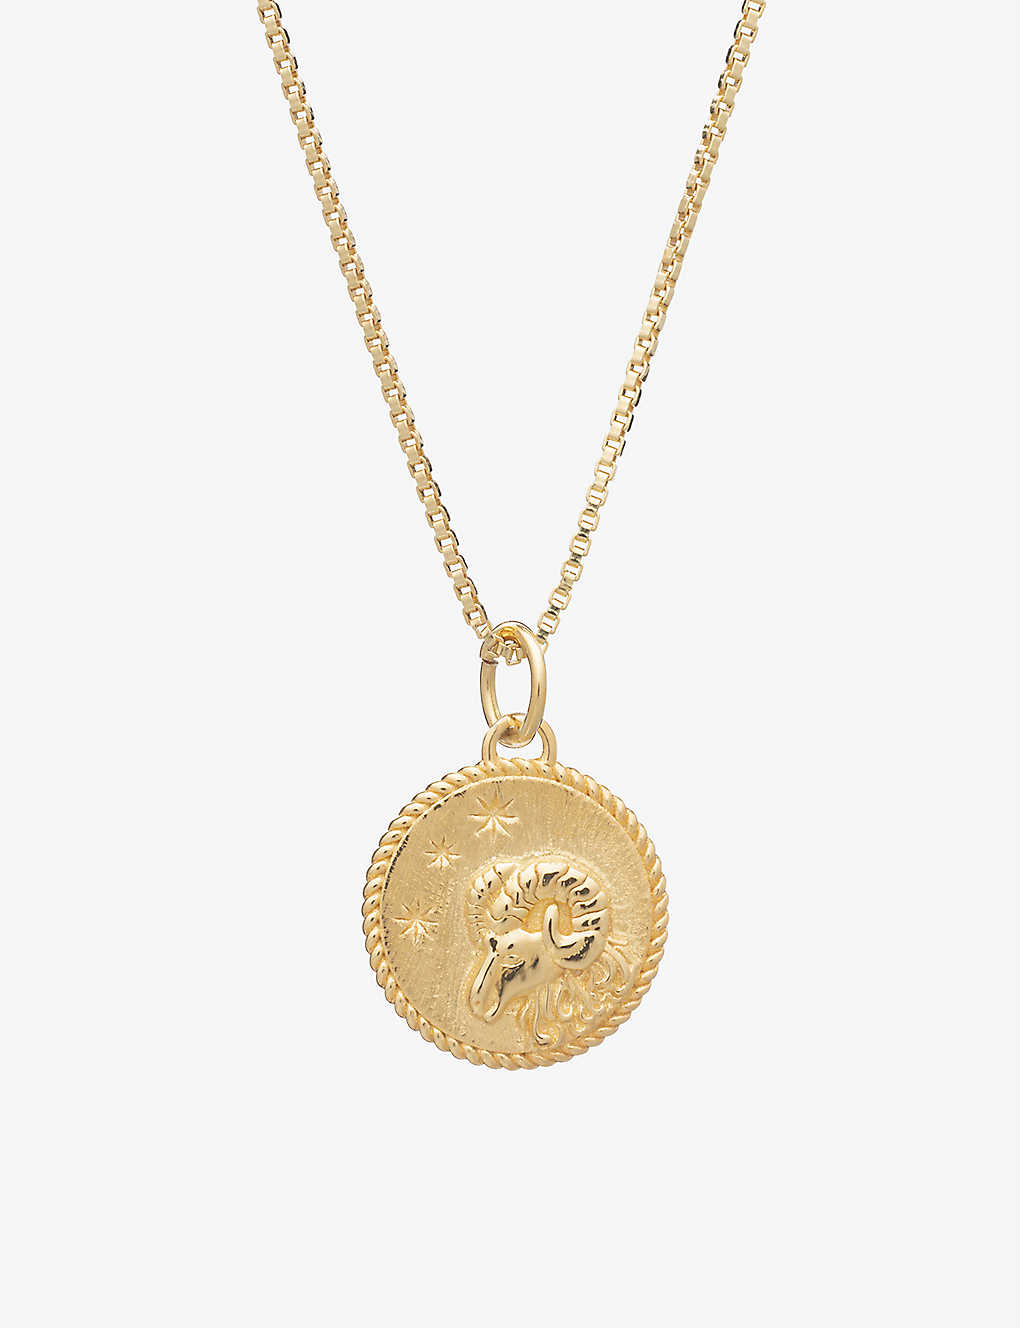 Rachel Jackson Zodiac Coin Aries Short 22ct Gold-plated Sterling Silver Necklace